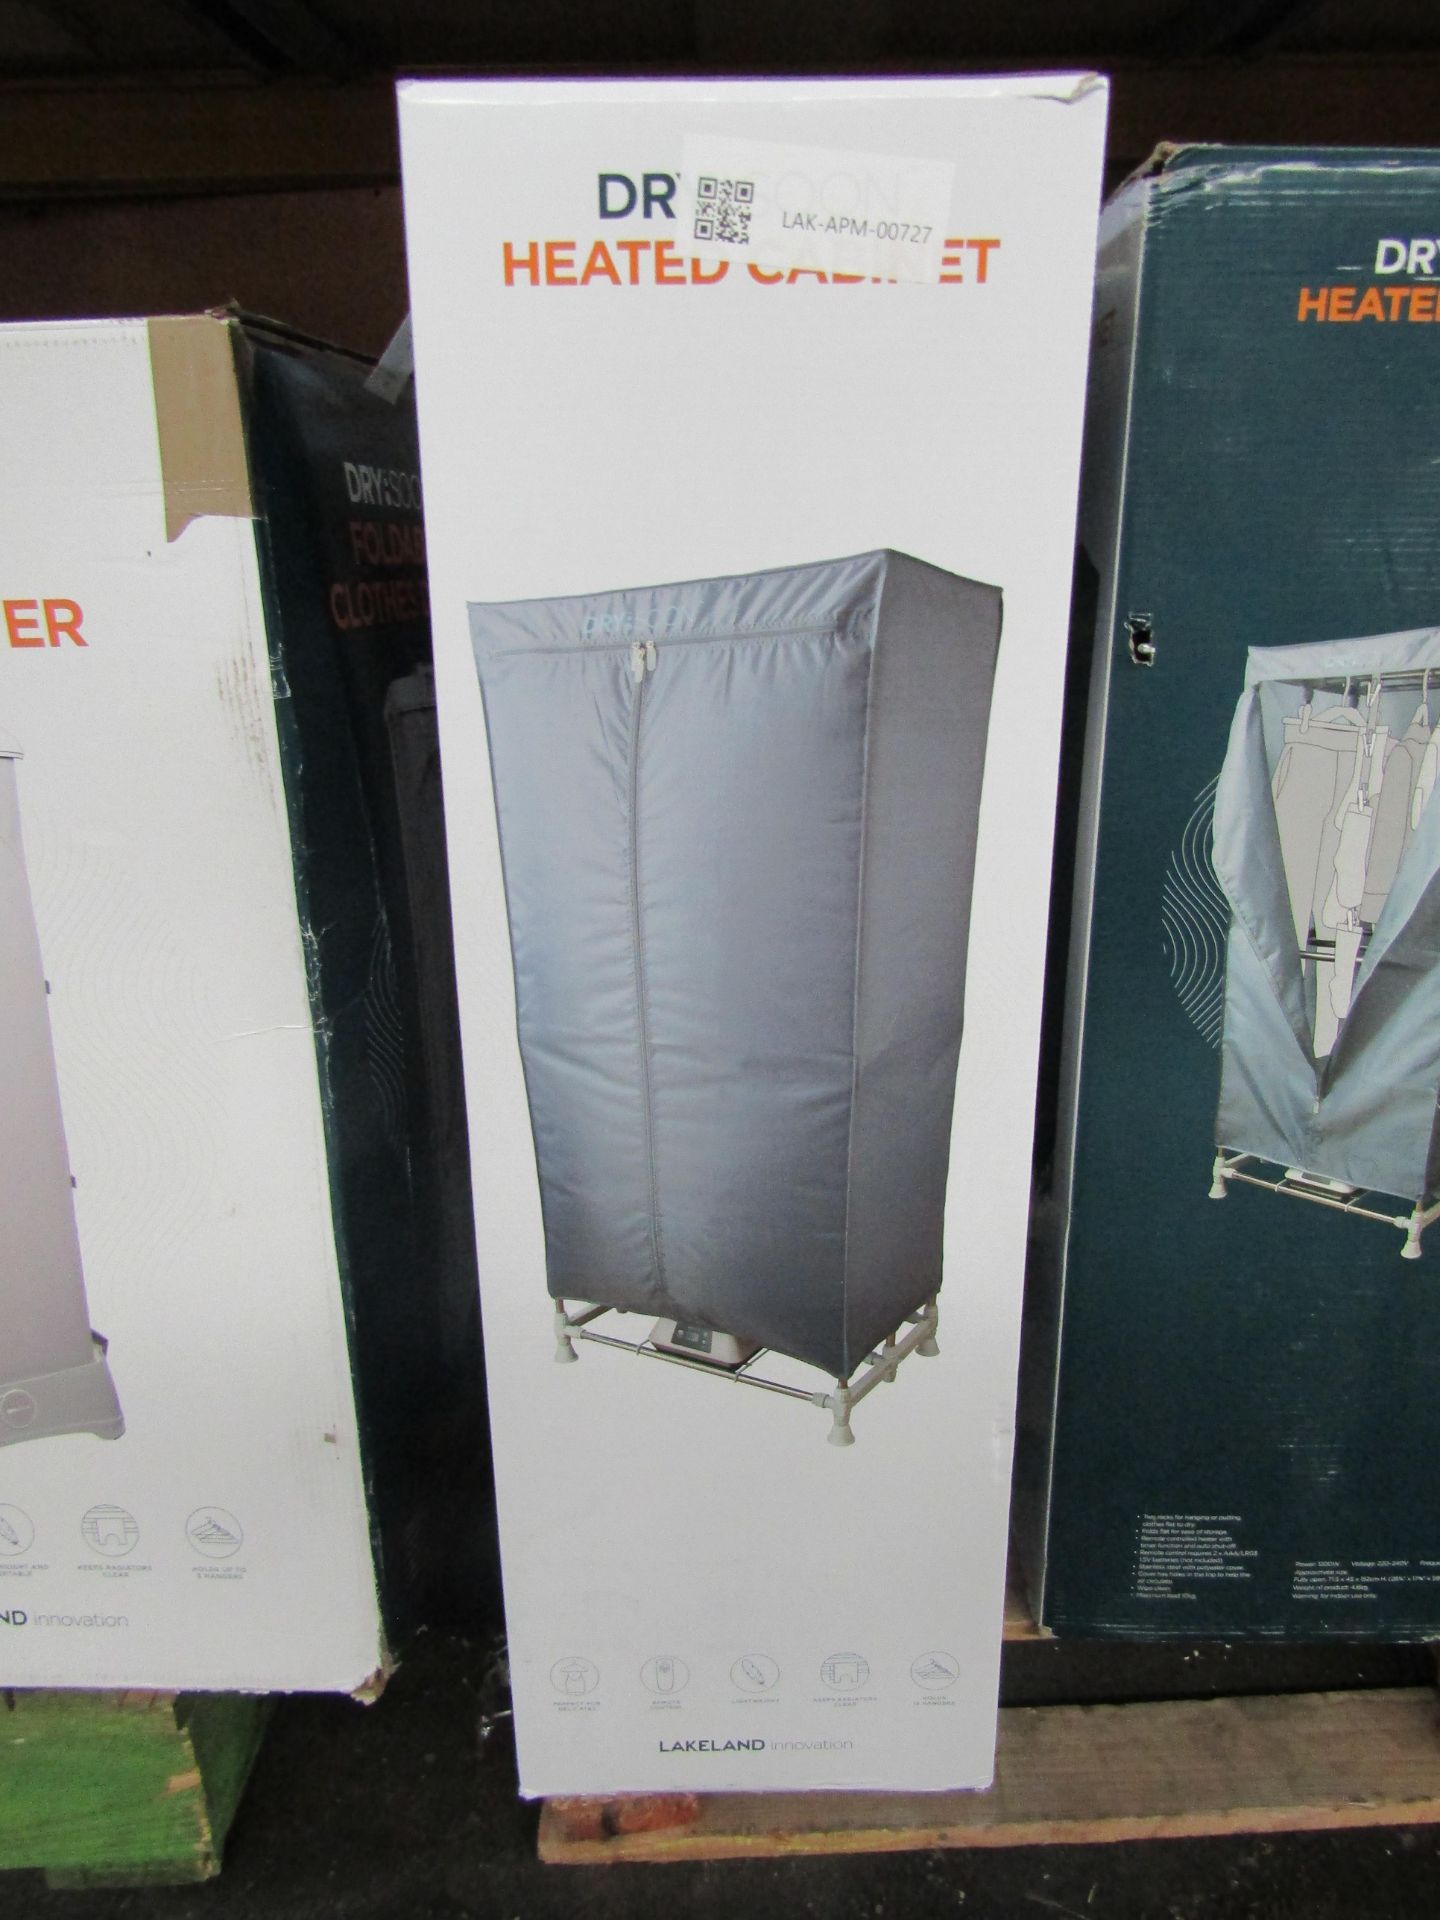 Dry:Soon Heated Cabinet RRP 91About the Product(s)Having your soggy laundry draped over radiators